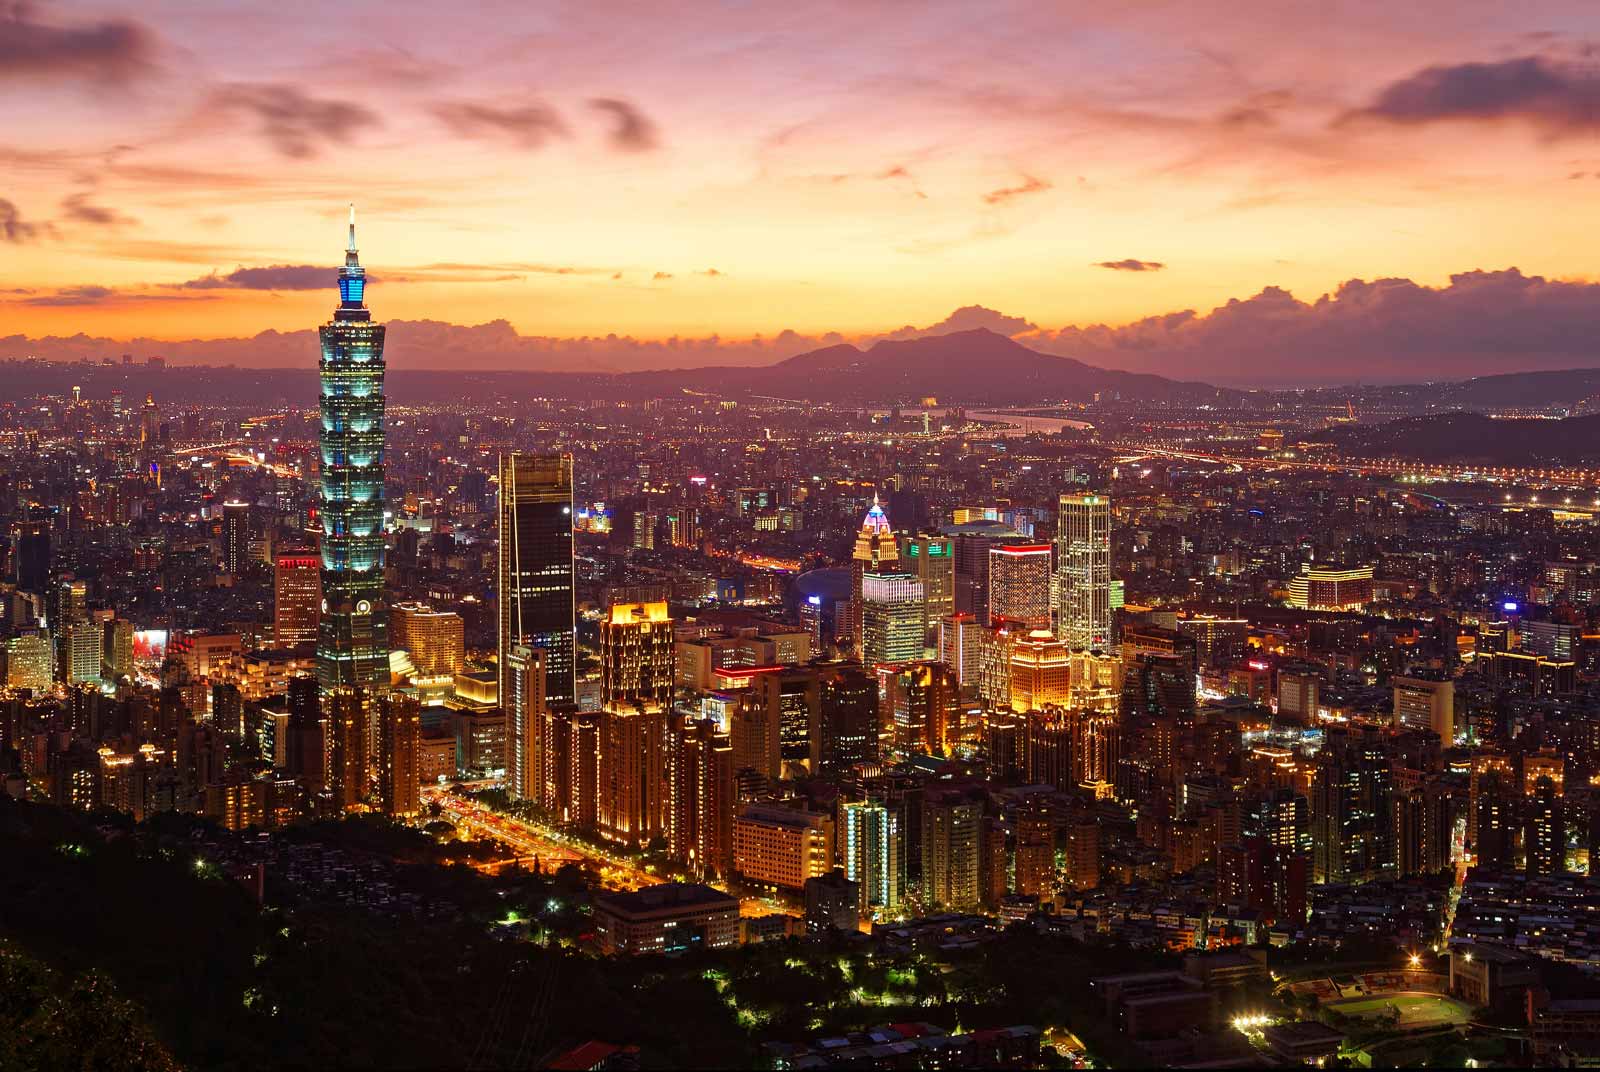 How to engineer a golden age for Taiwan